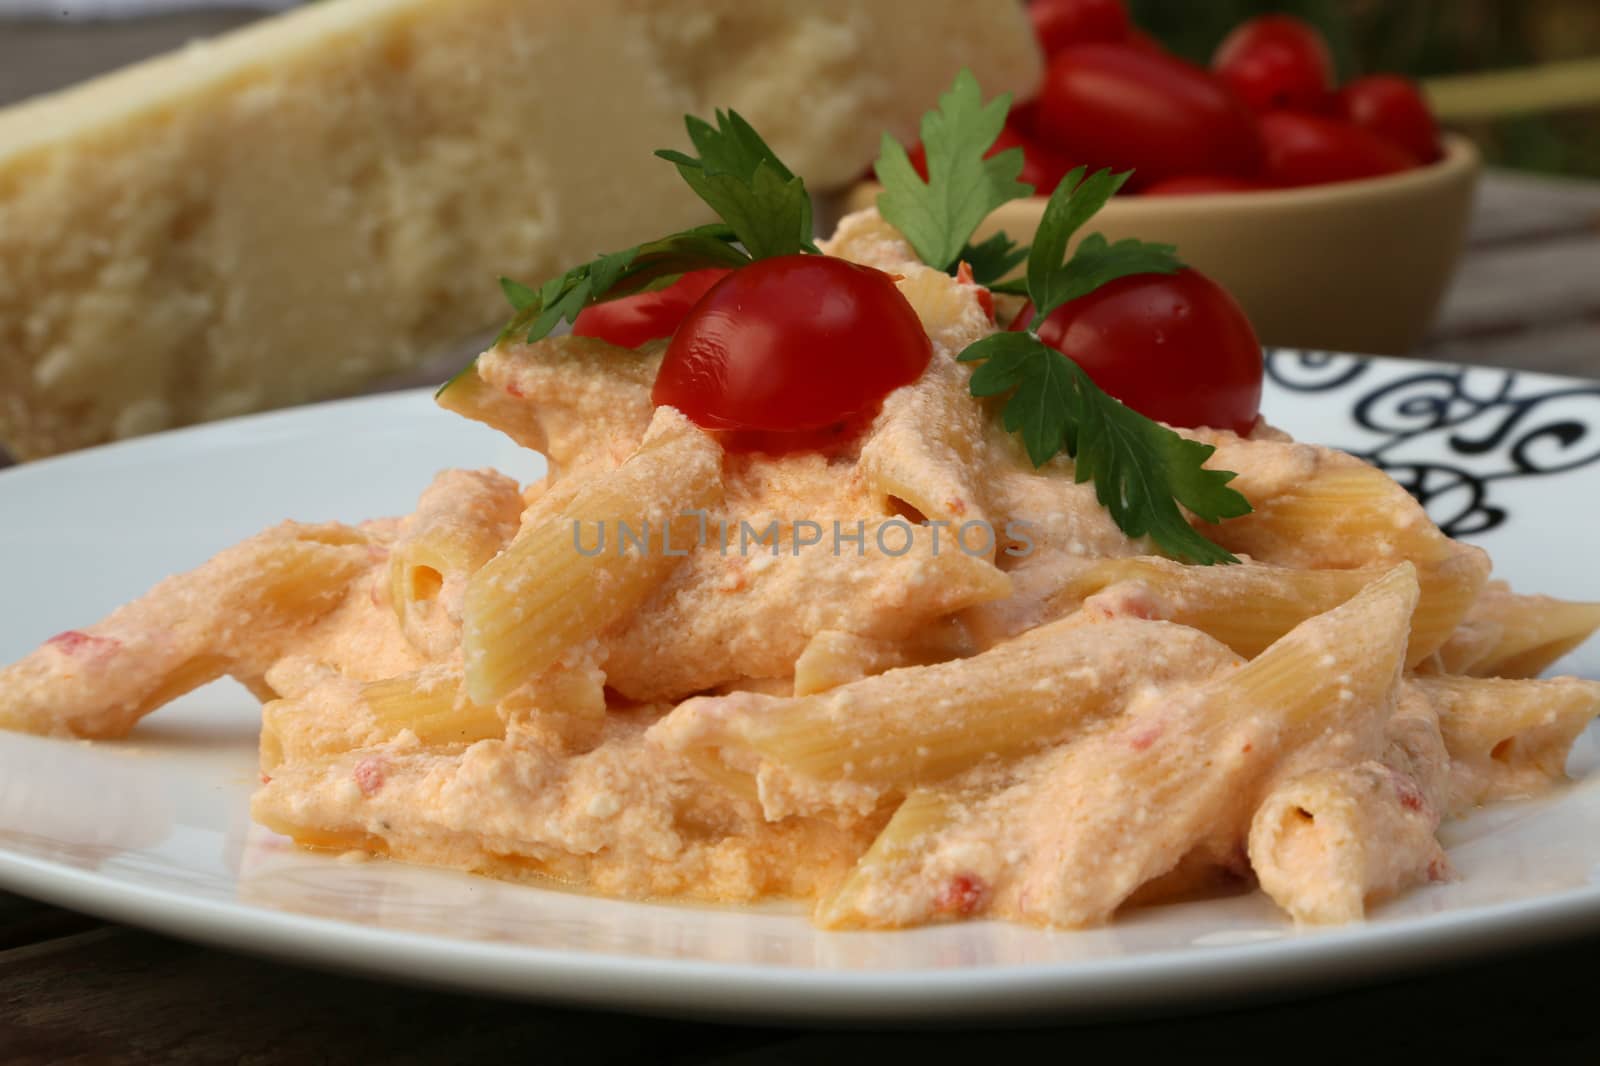 Italian pasta with ricotta cheese, parmesan, cherry tomatoes and parsley.